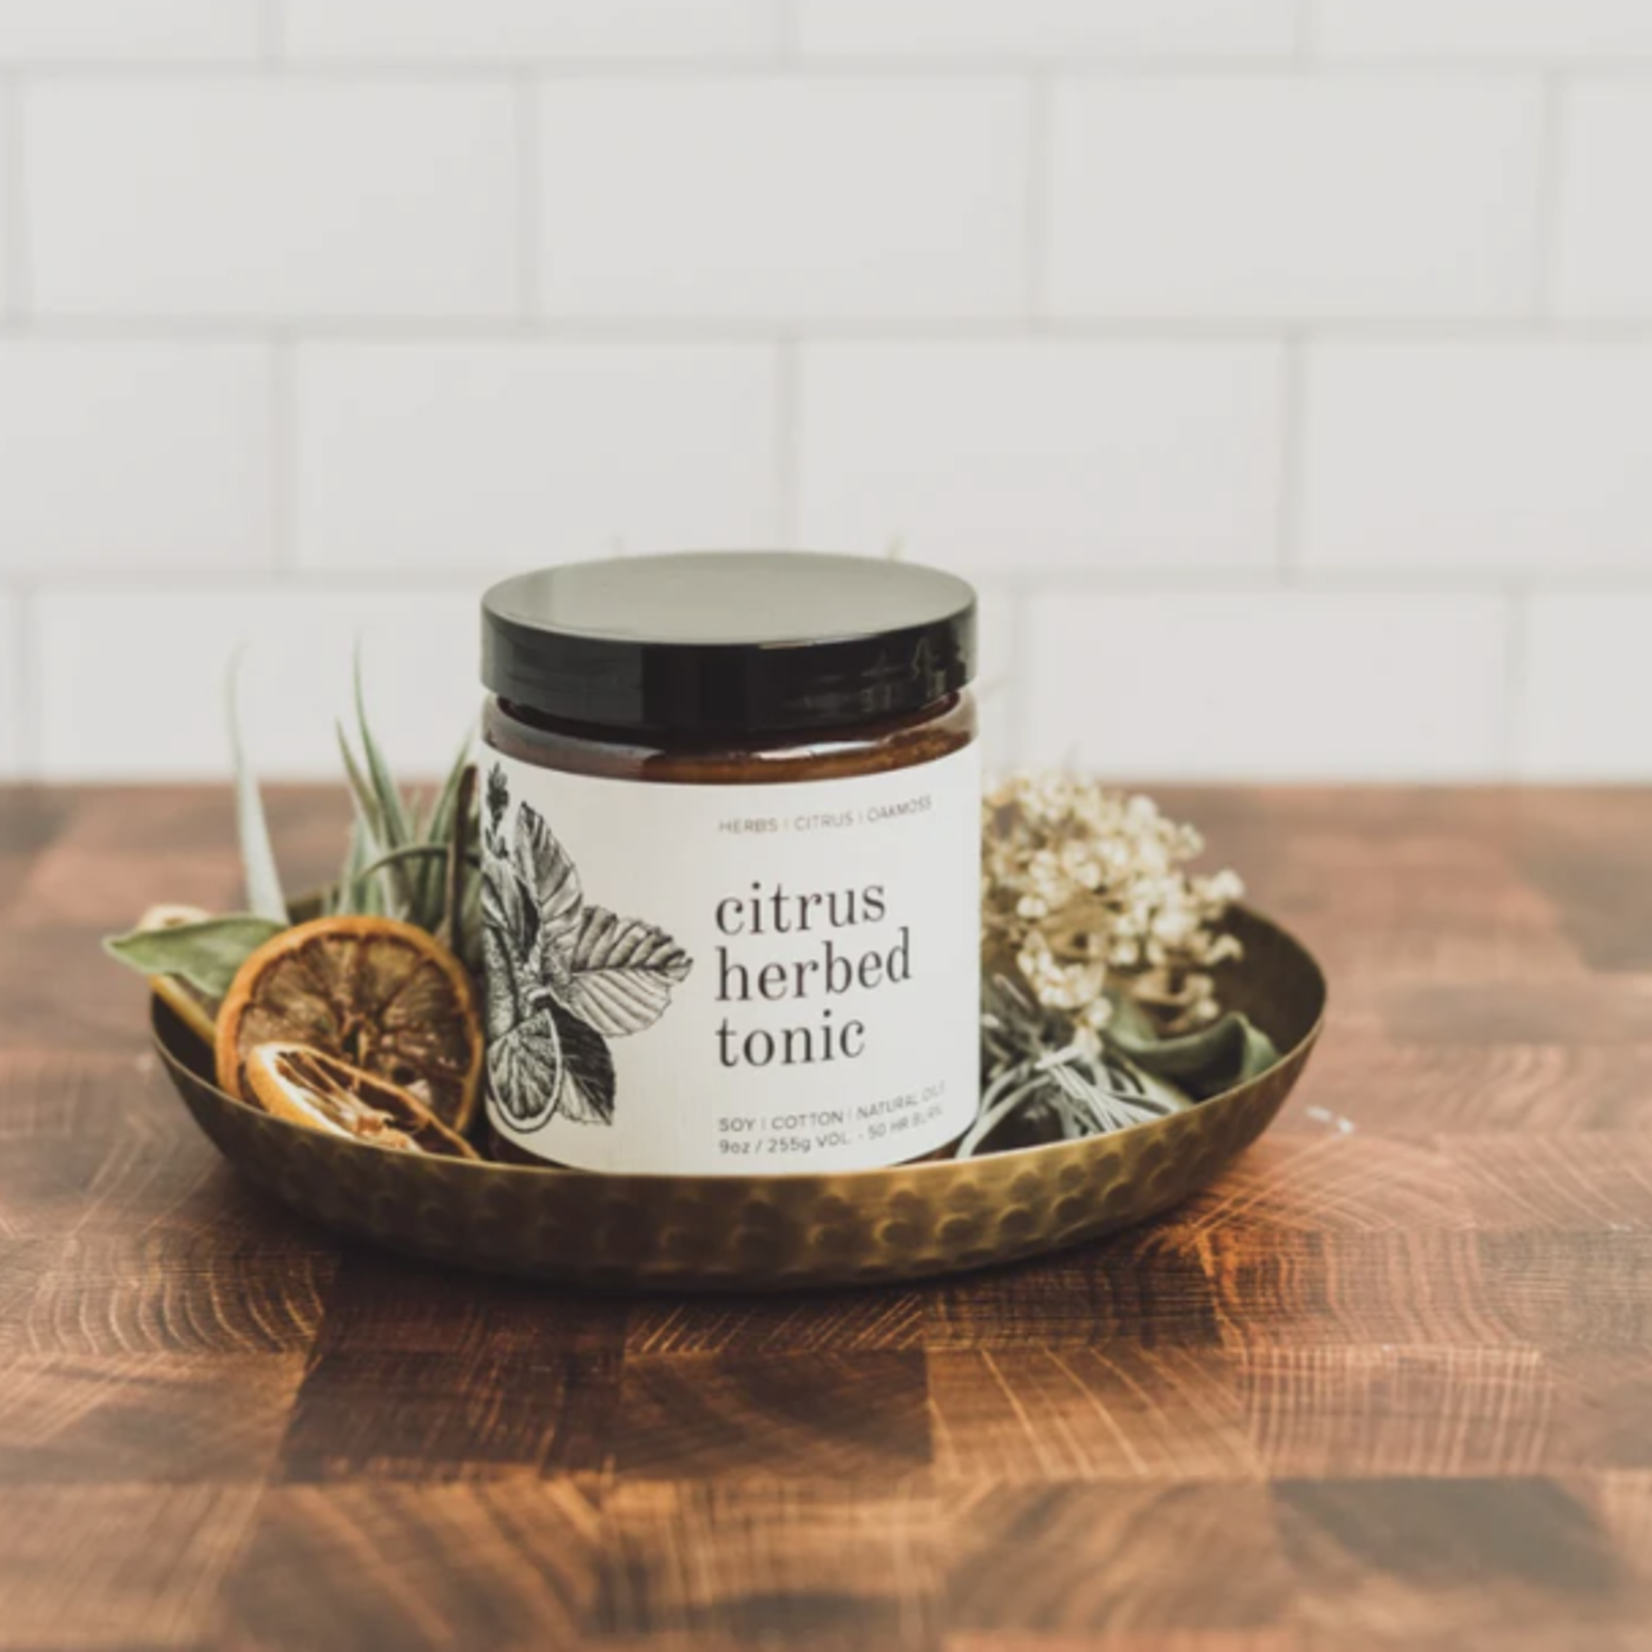 Broken Top Candle Co. Citrus Herbed Tonic Soy Candle